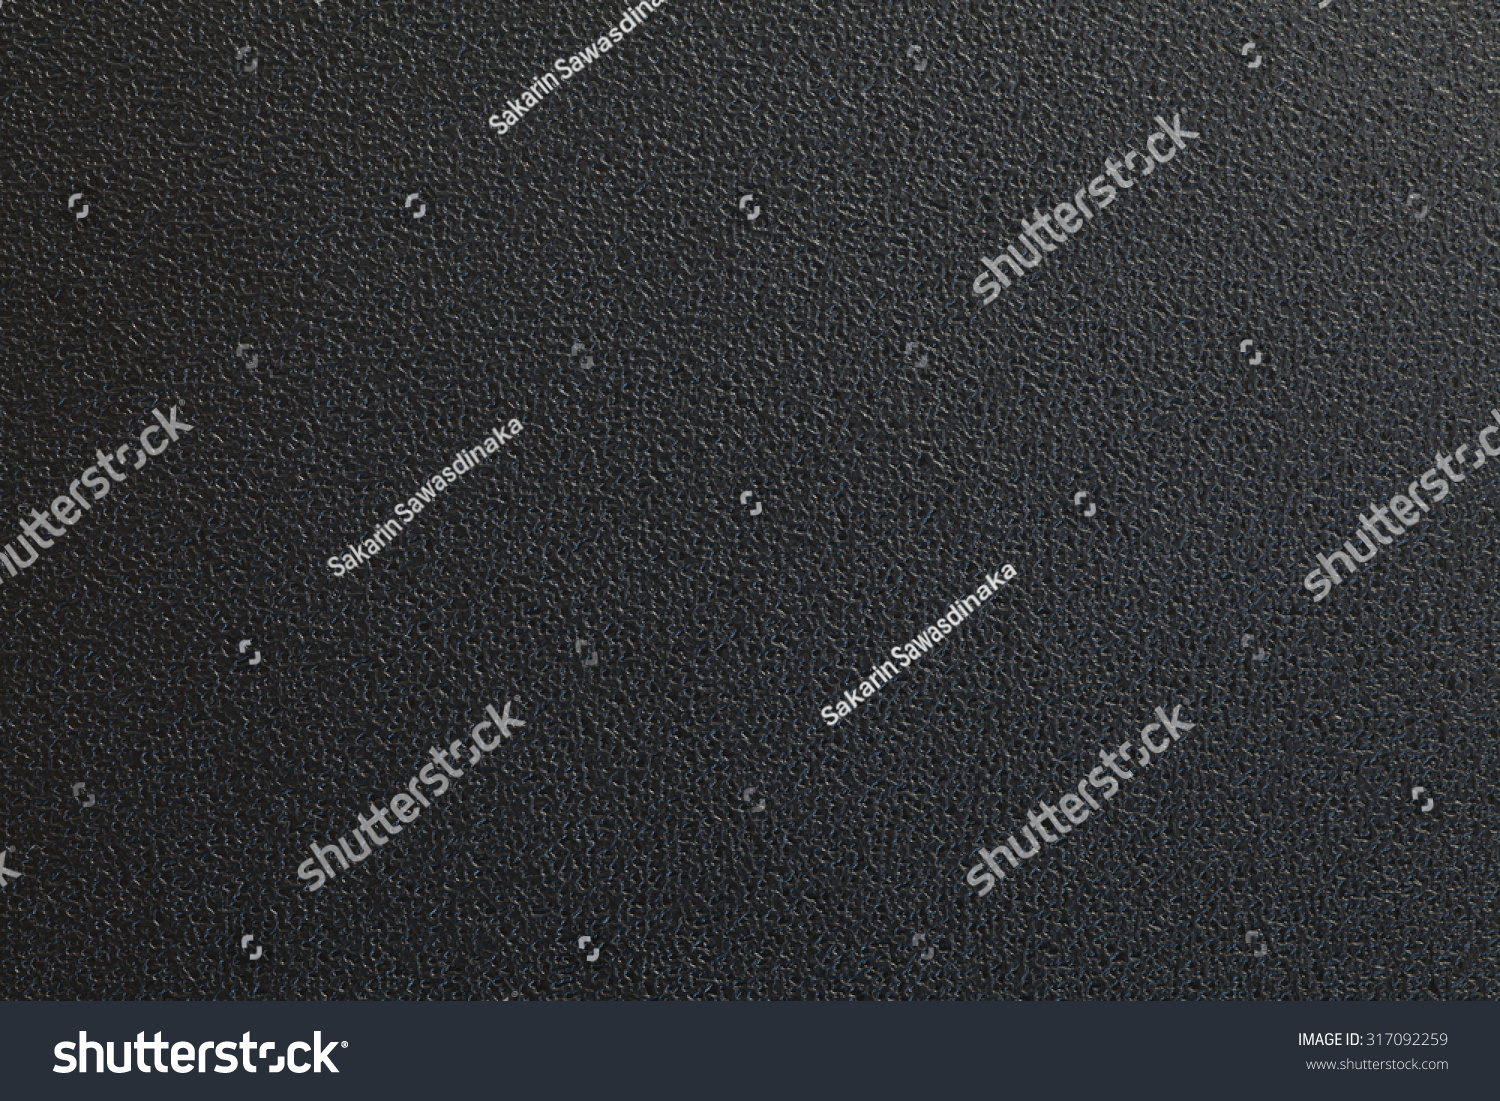 Black plastic material seamless background and texture #317092259